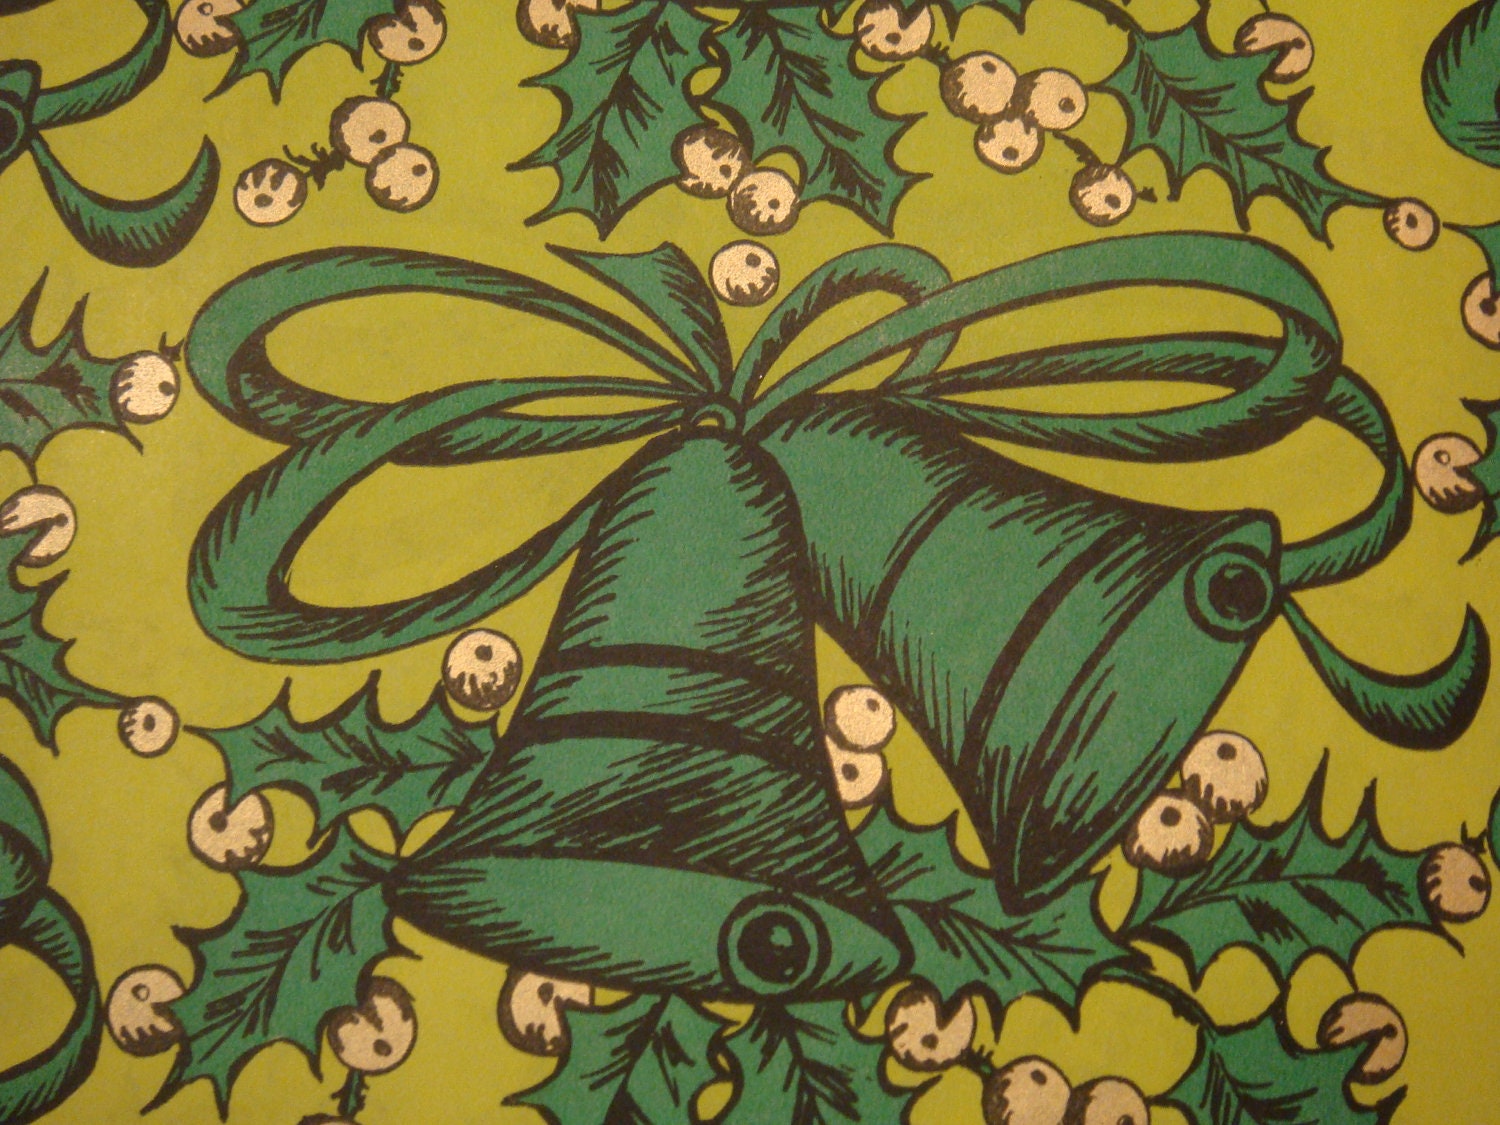 Vintage Gift Wrapping Paper - Monochrome Green Bells - By Lady Clair - 1 Unused Full Sheet